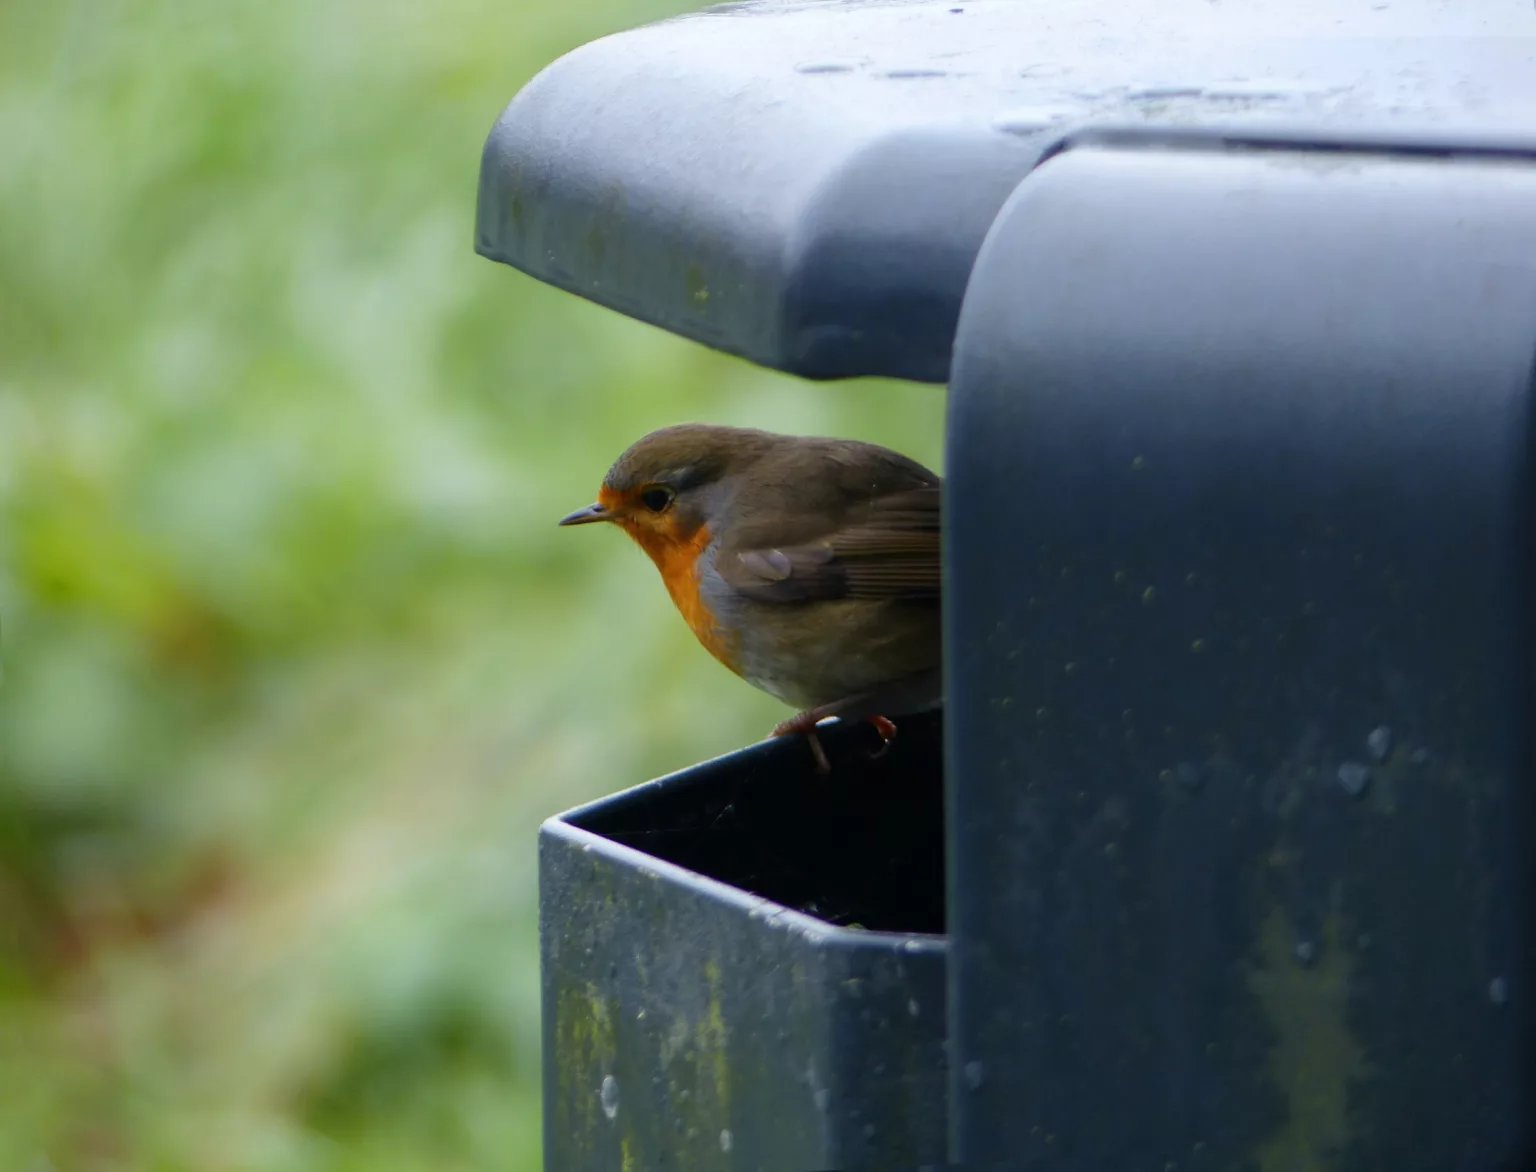 A robin sits on the edge of a trash can in a park